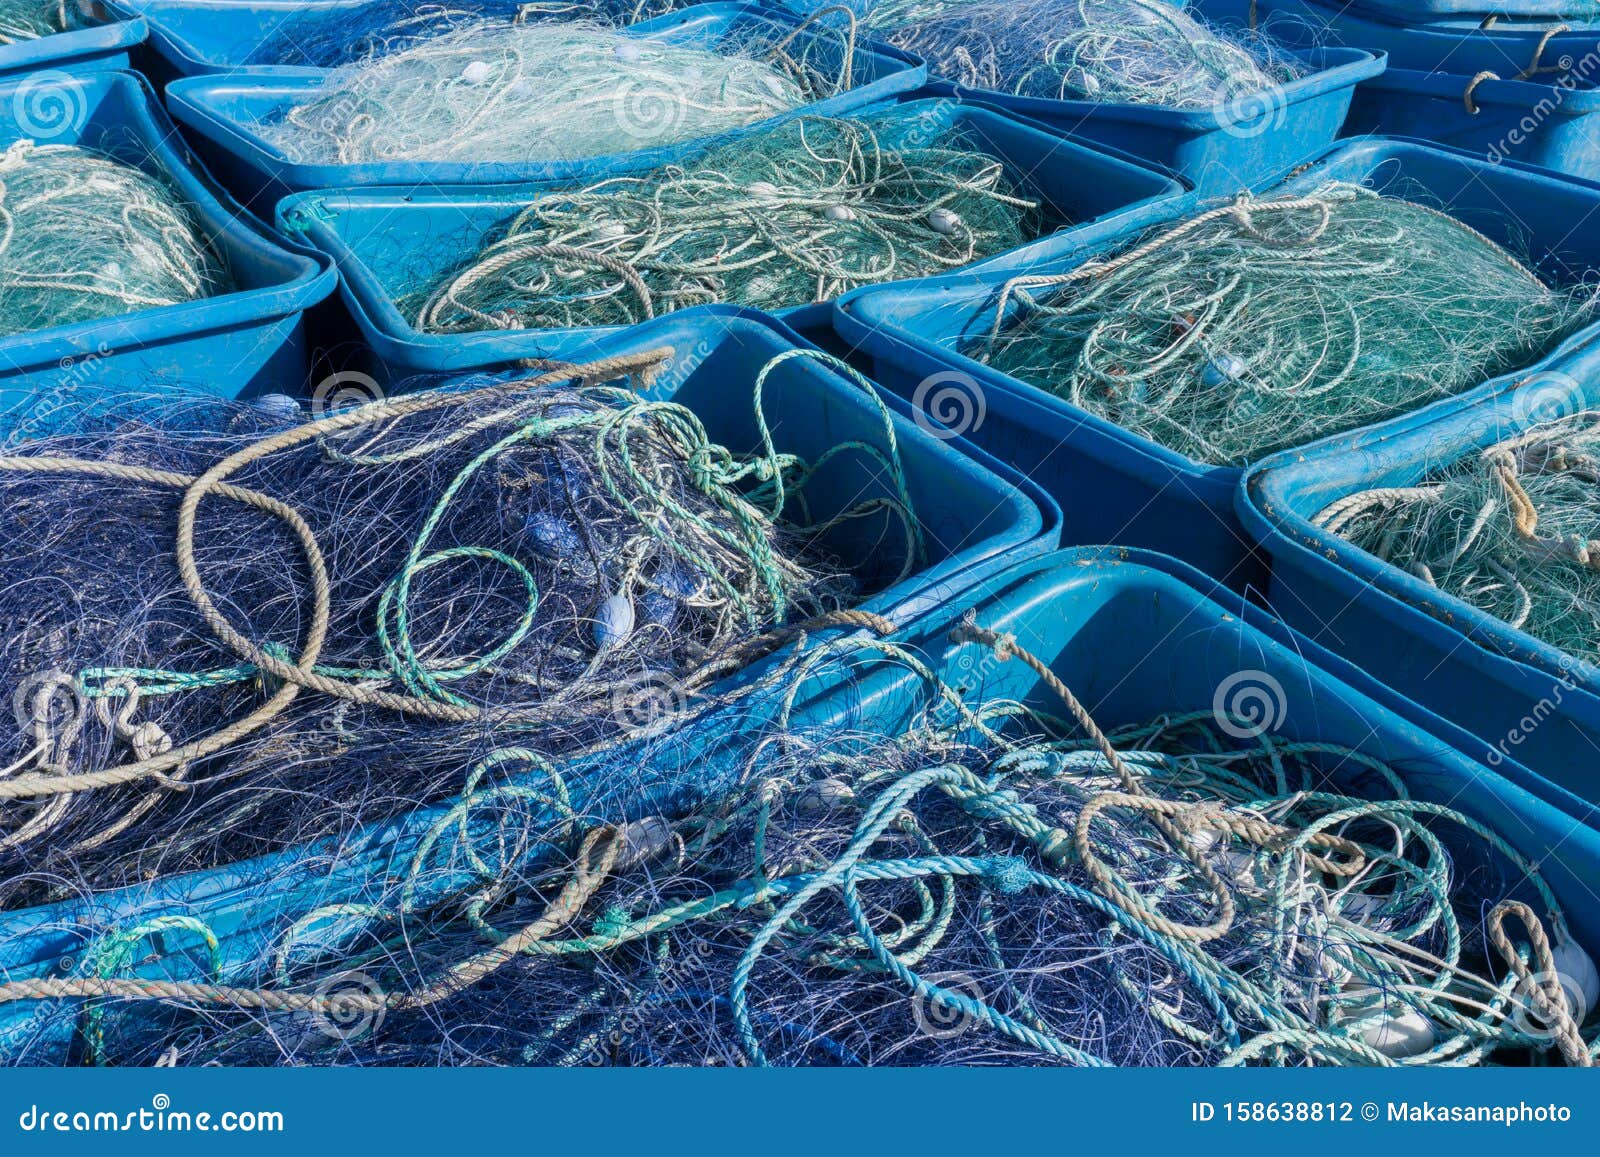 Large Plastic Tubs Filled with Industrial Size Fishing and